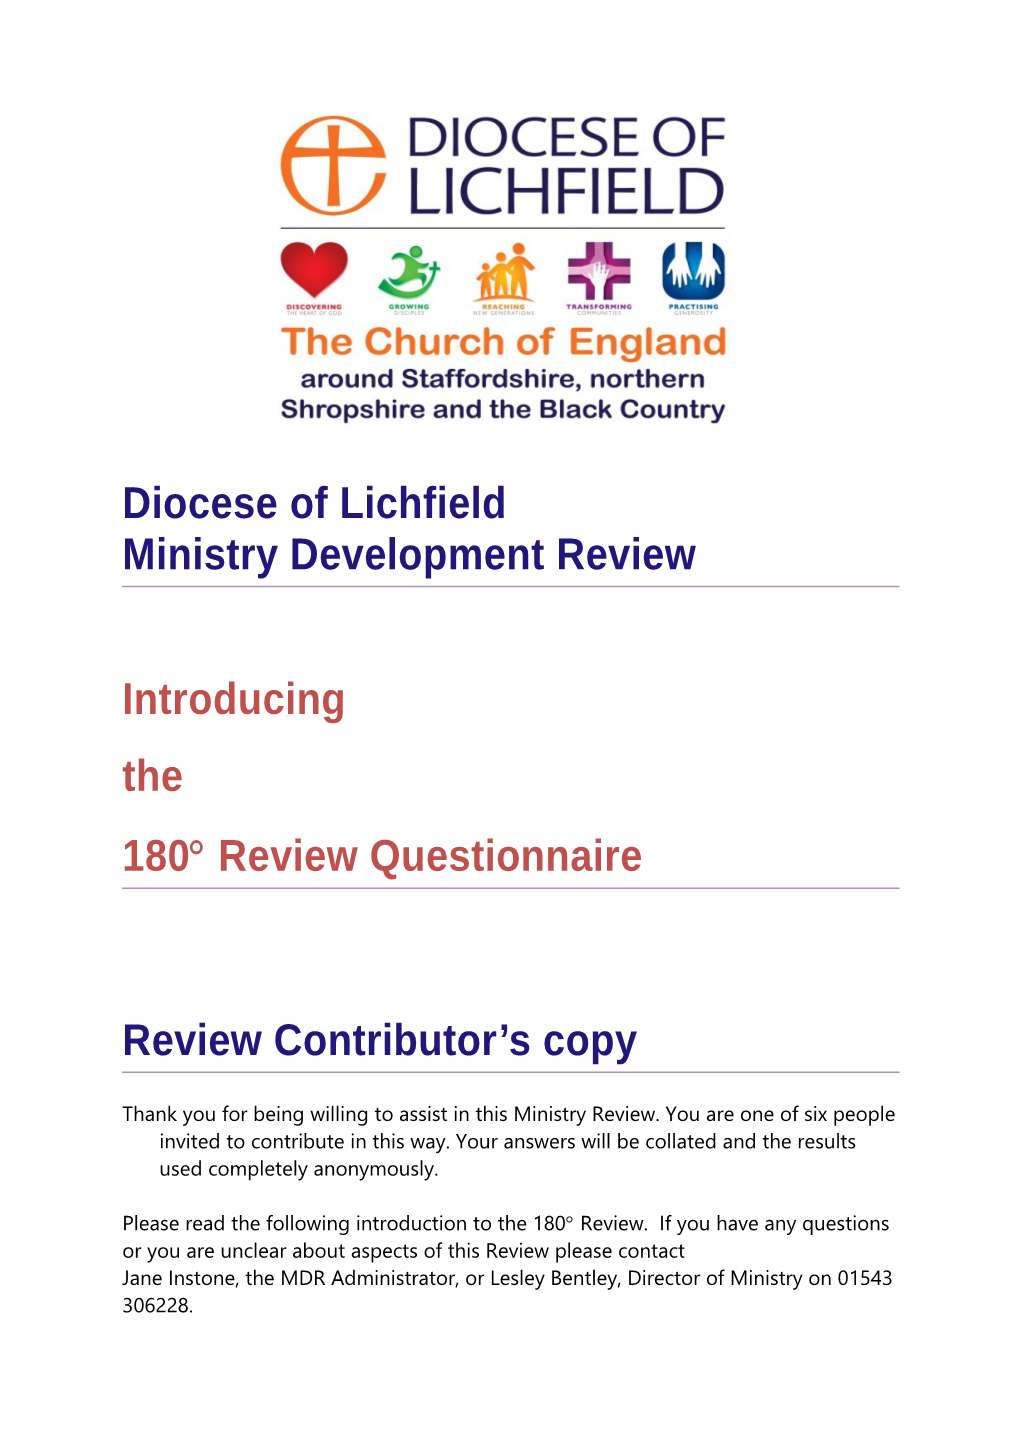 Diocese of Lichfield Ministry Development Review